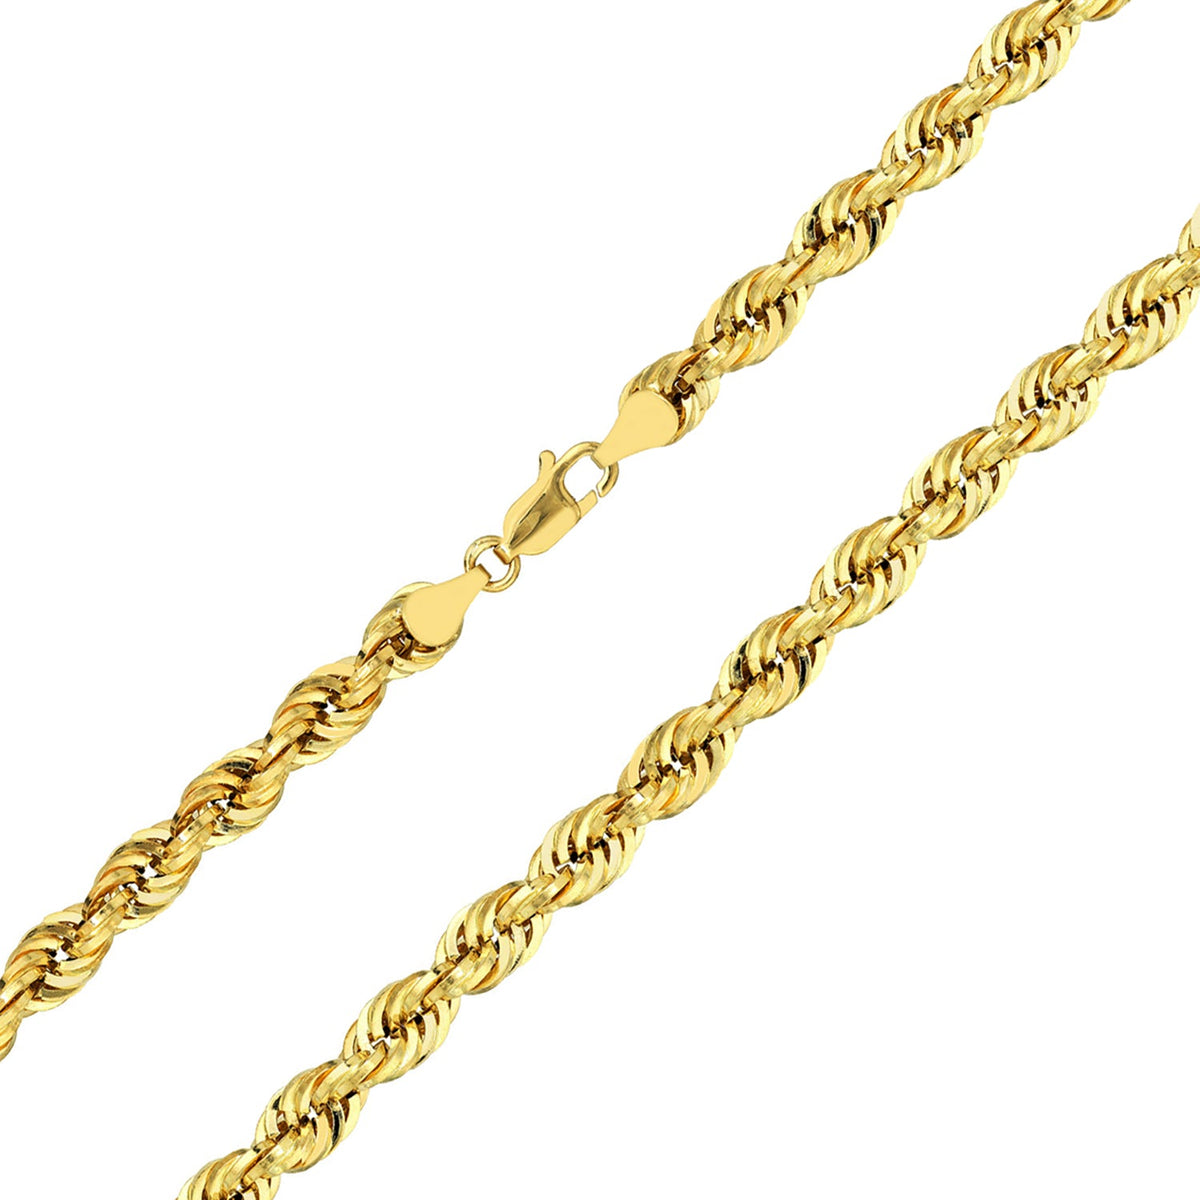 Solid 14k Yellow Gold 6mm Rope Chain Necklace with Lobster Lock - Diamond-Cut